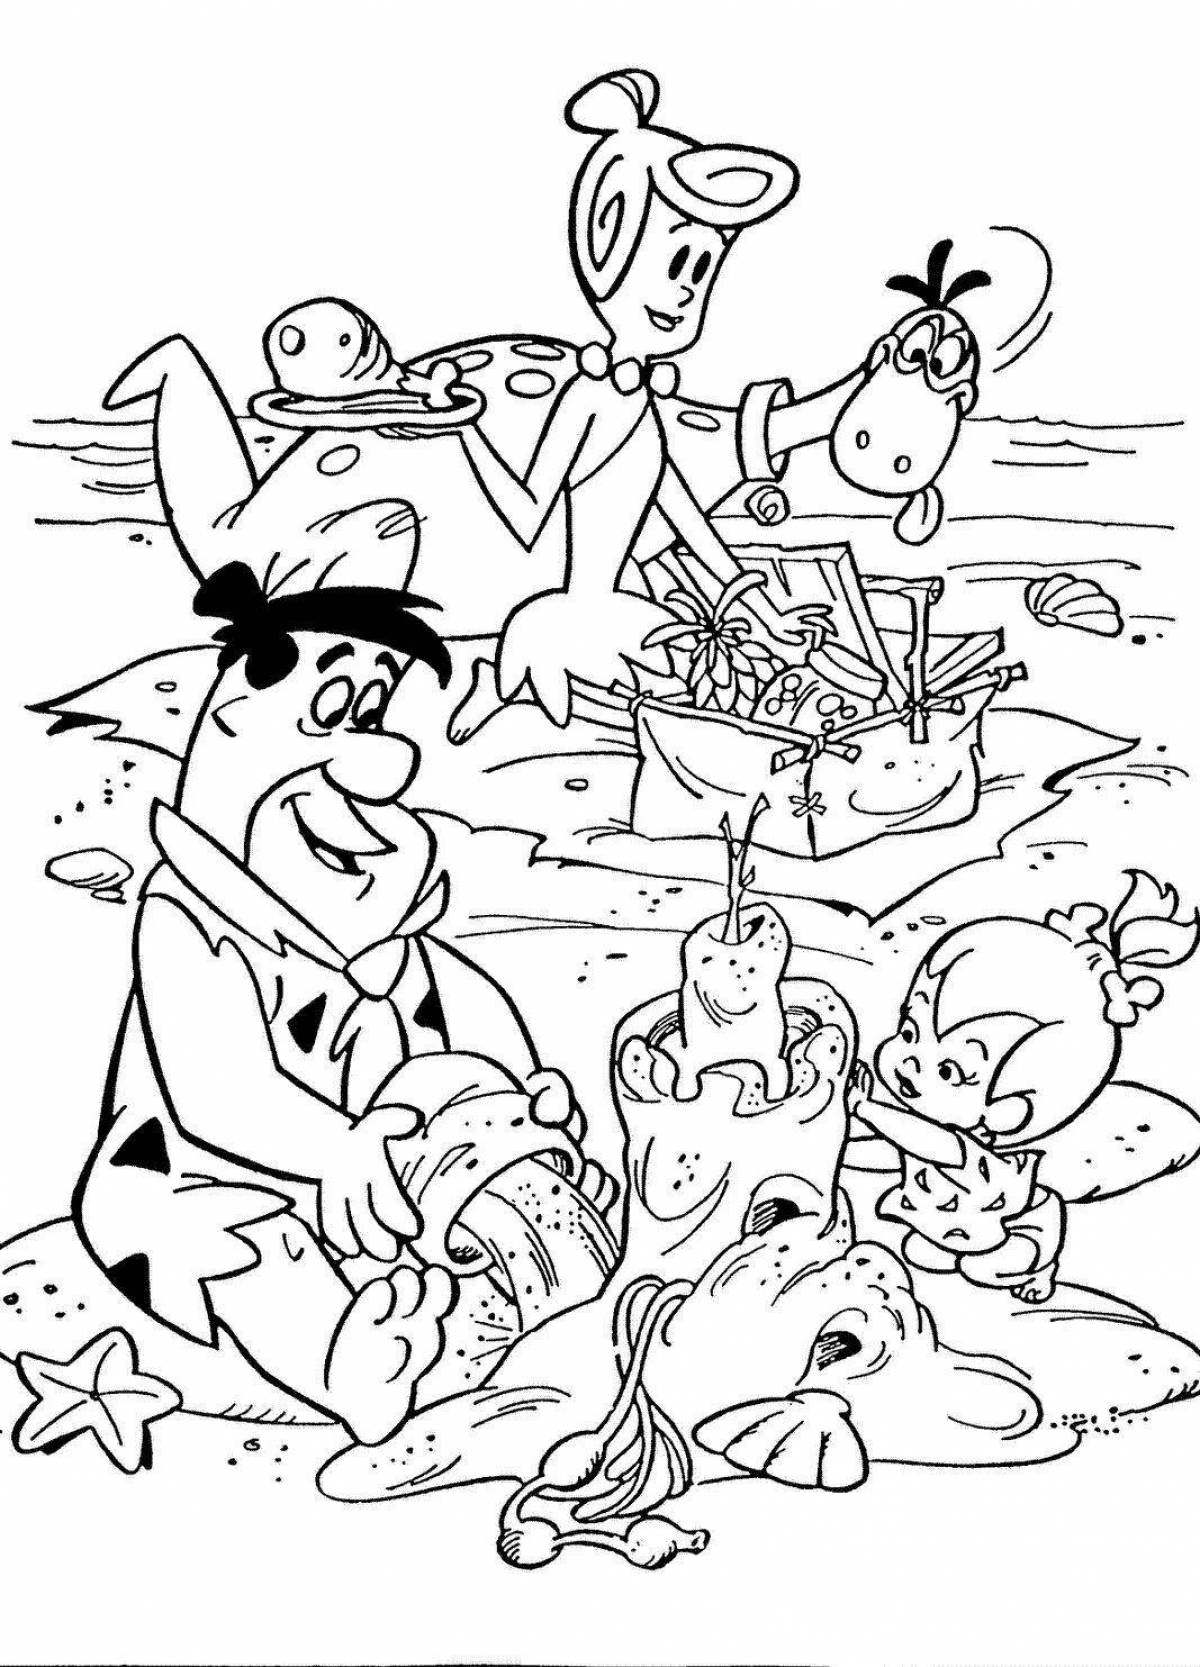 Grand fred flintstone coloring book